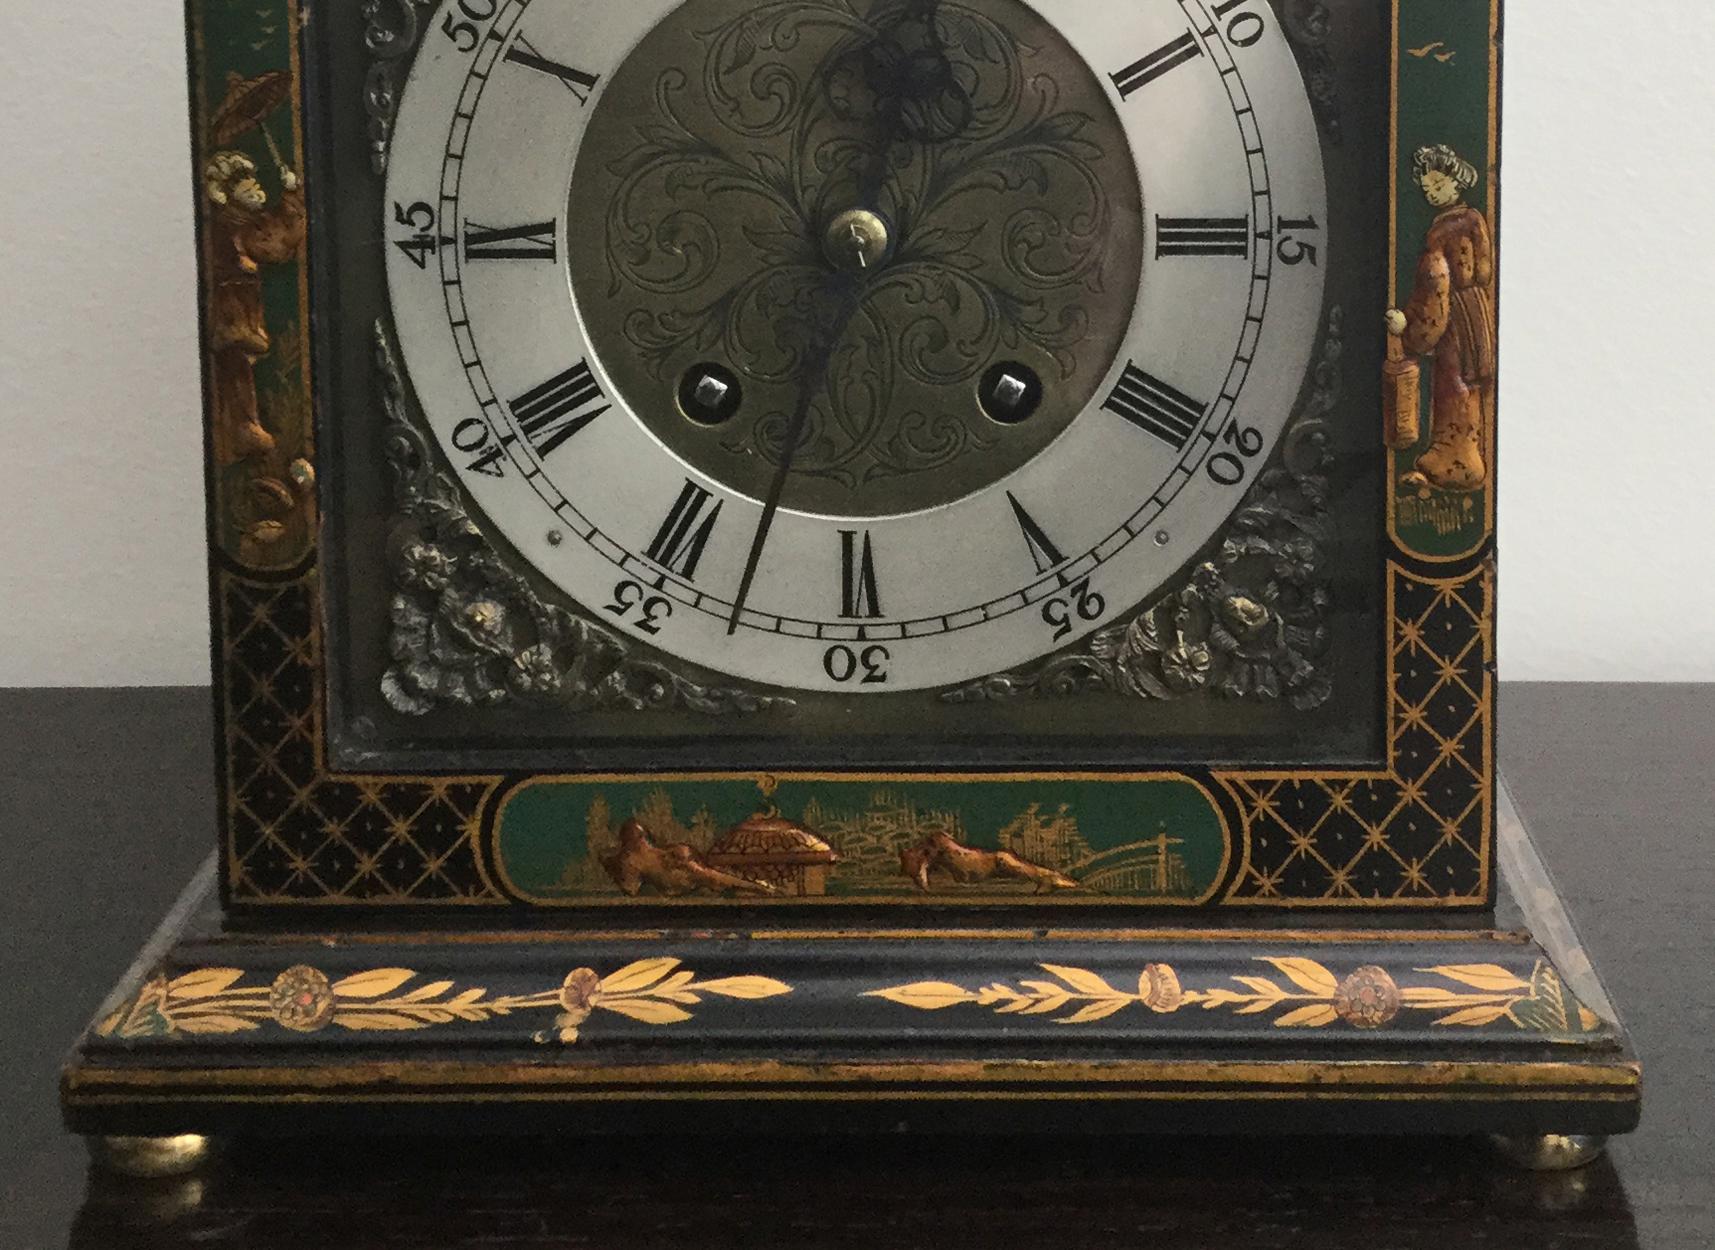 British Green Chinoiserie Georgian Style Mantel Clock by English Maker Astral